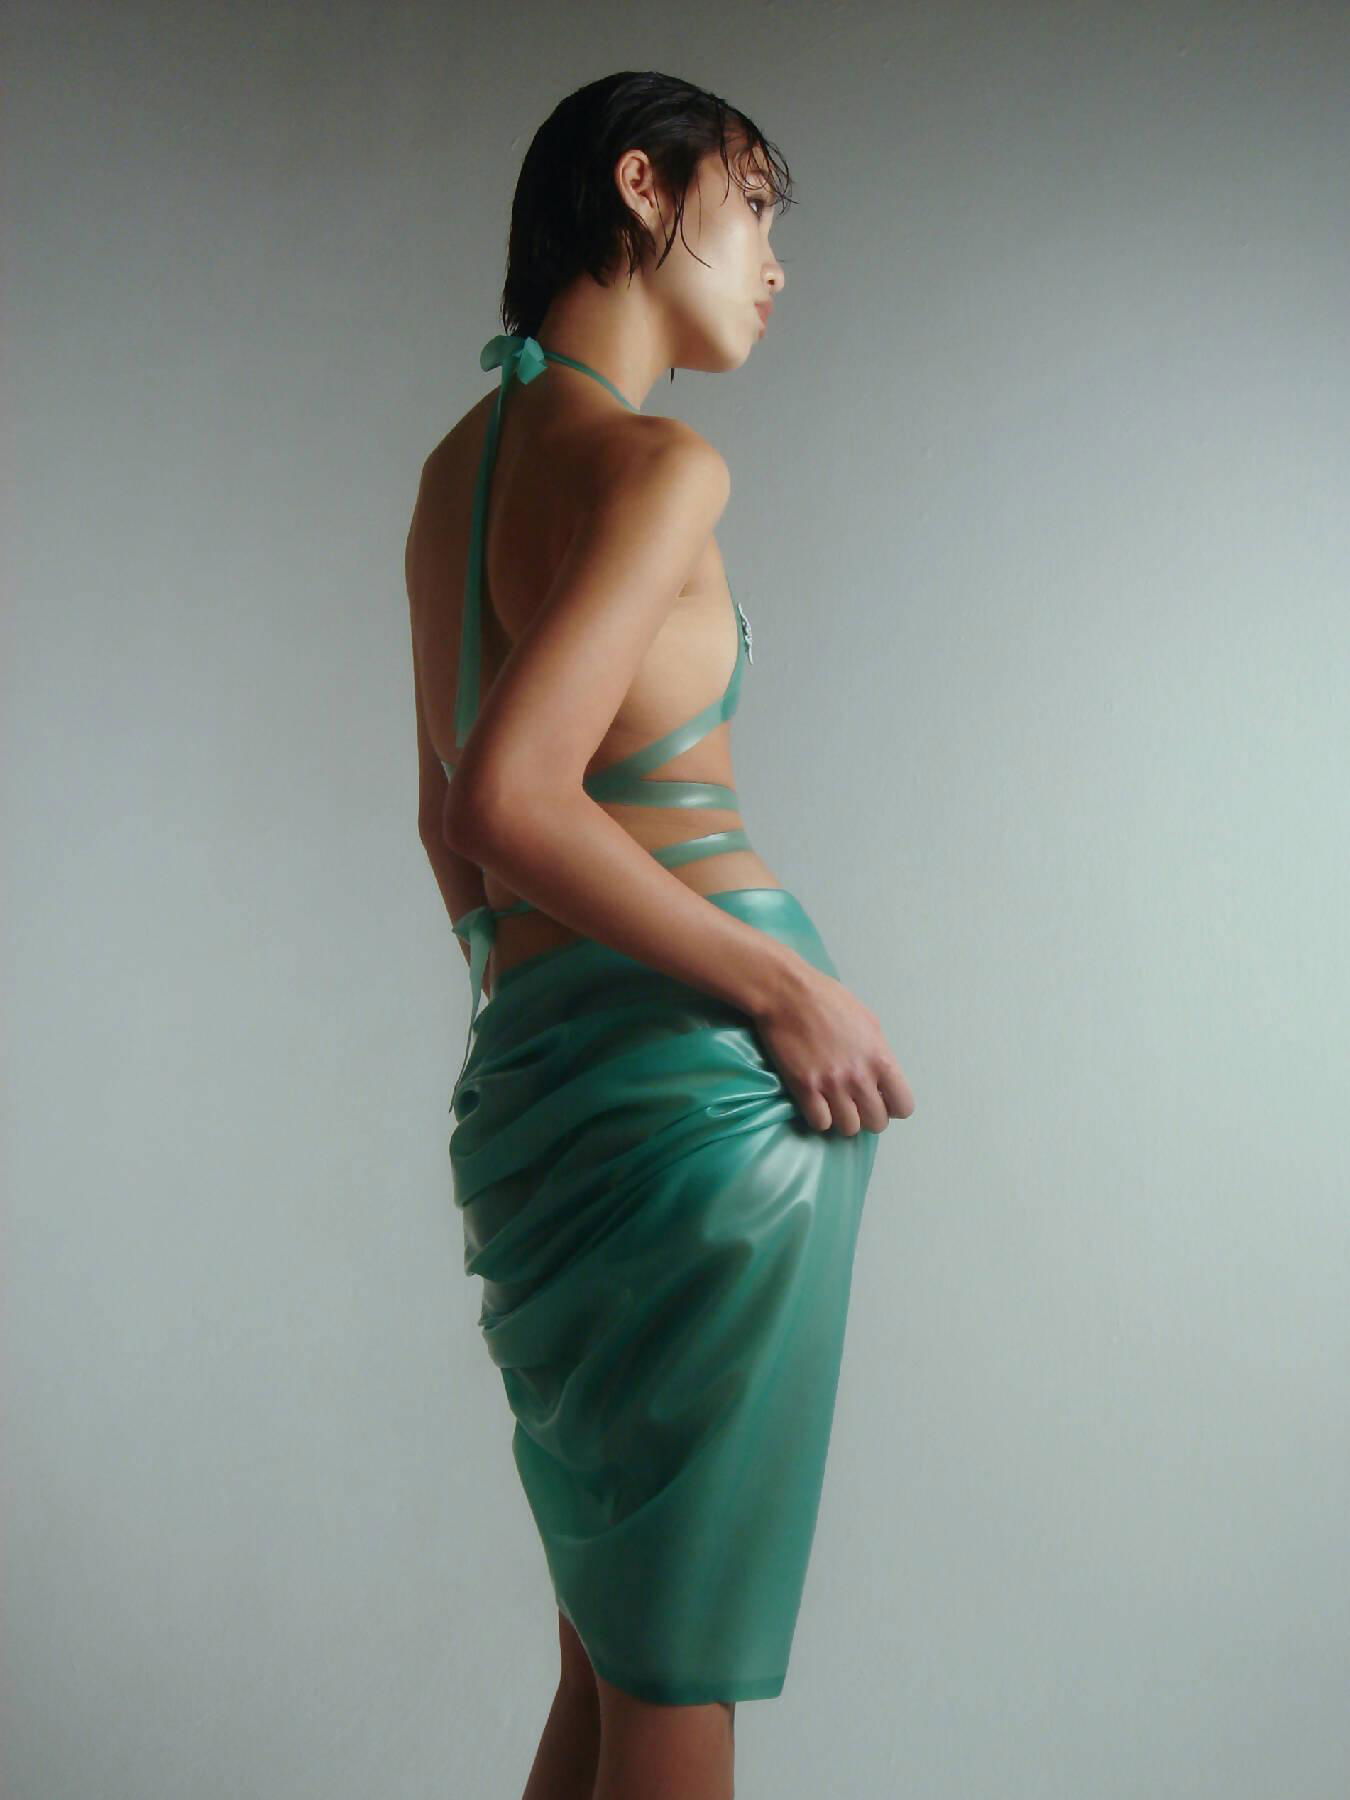 Draped Skirt by SHERS STUDIOS